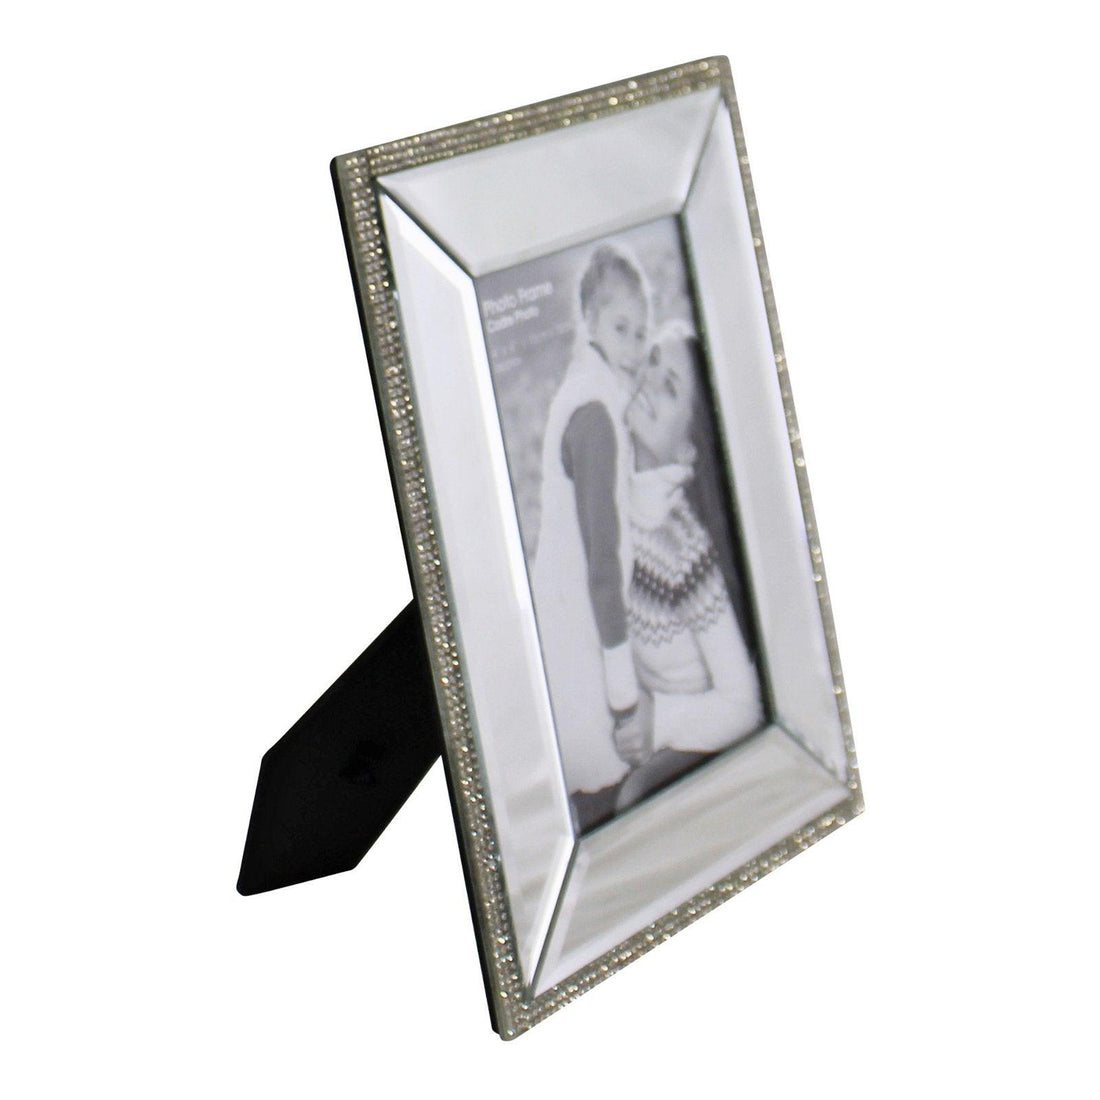 4 x 6 Mirrored Freestanding Photo Frame With Crystal Detail - £18.99 - Photo Frames 